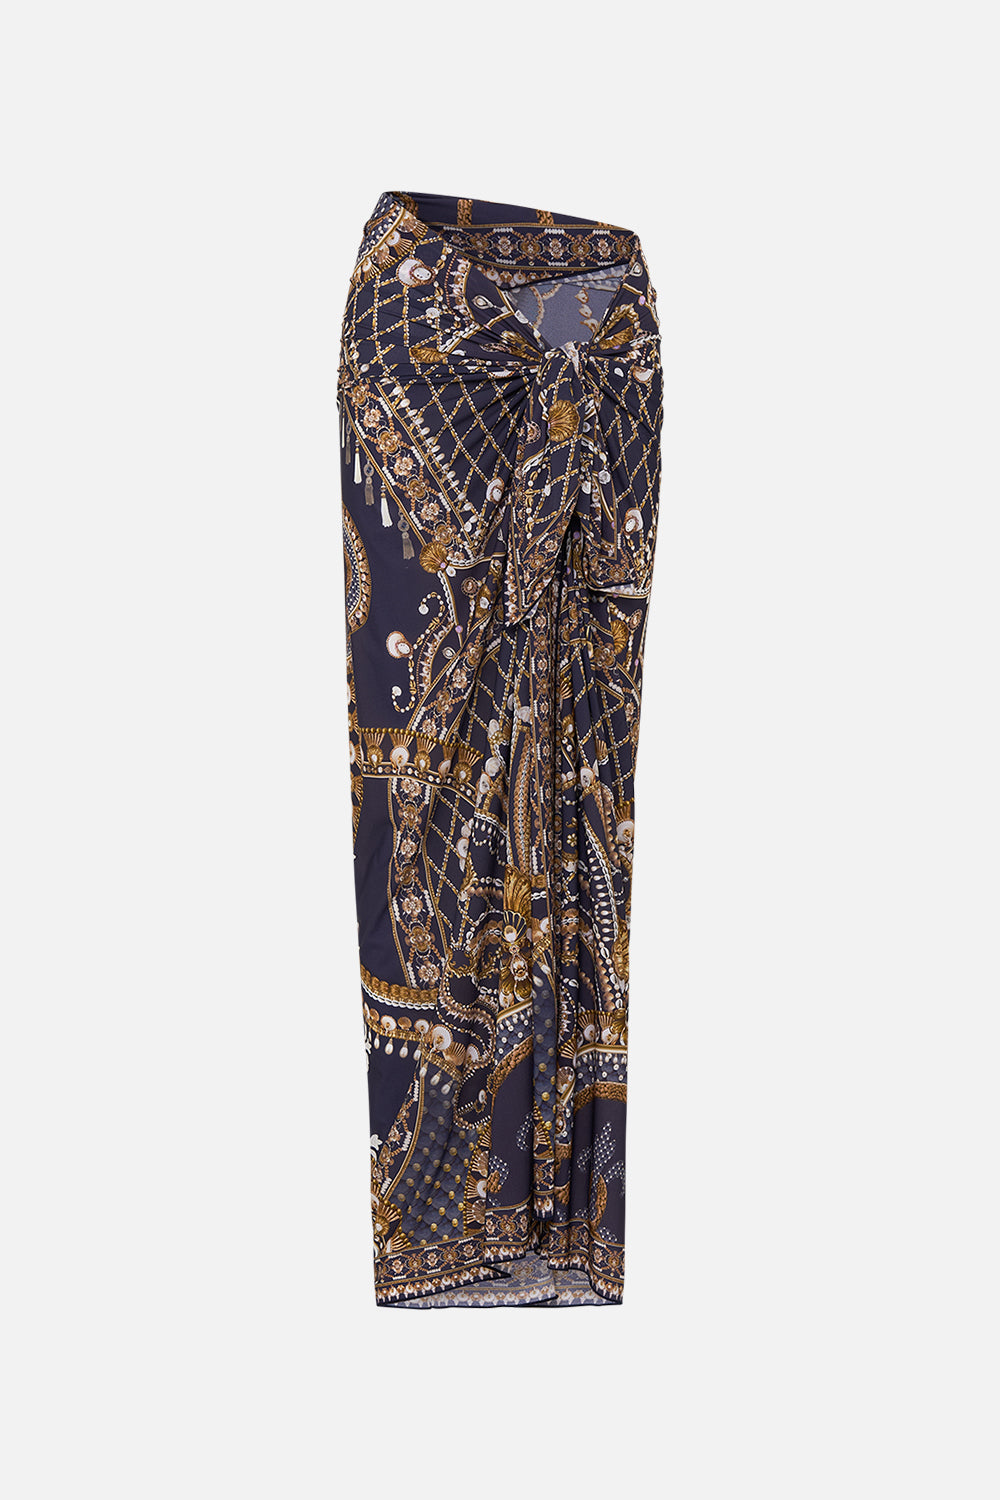 CAMILLA gold/black long sarong in Dance with the Duke